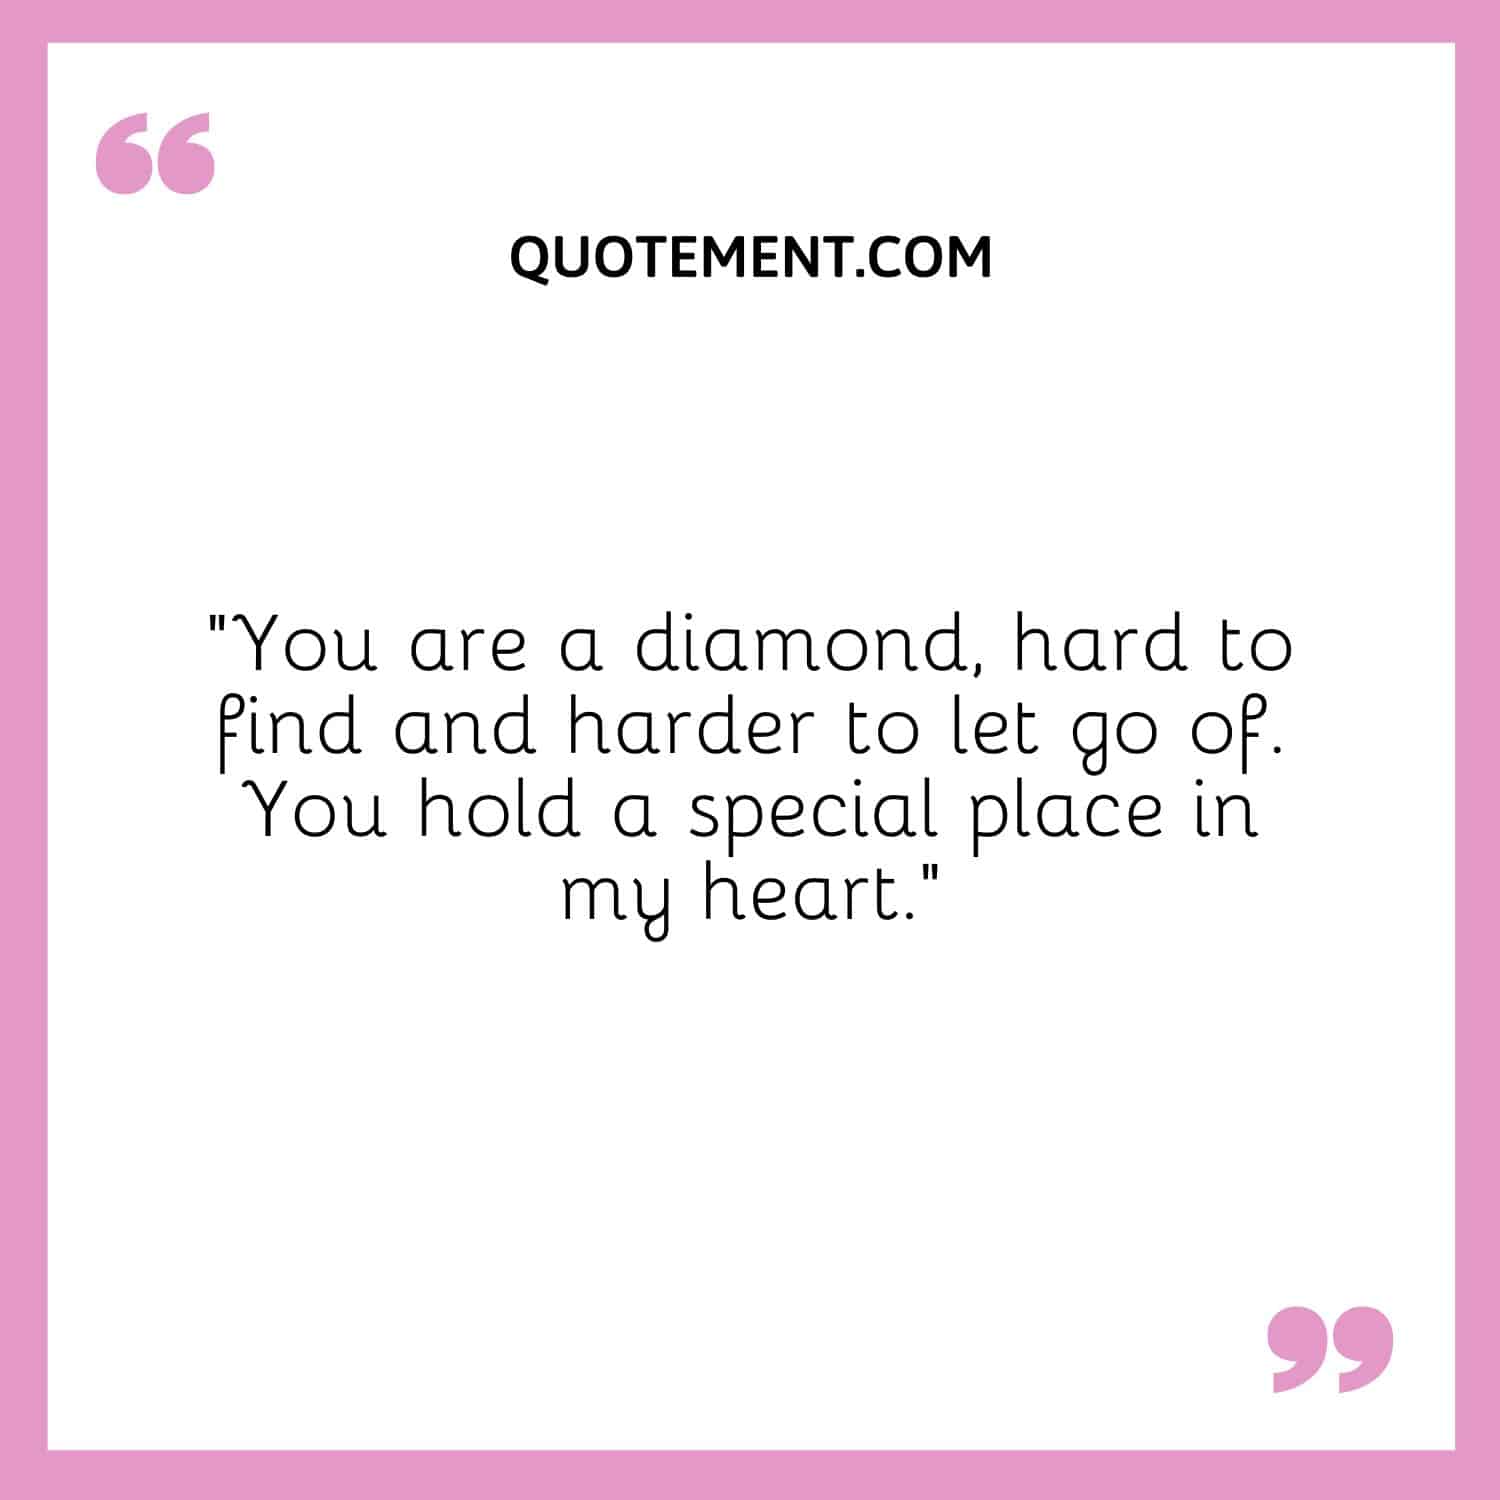 You are a diamond, hard to find and harder to let go of.